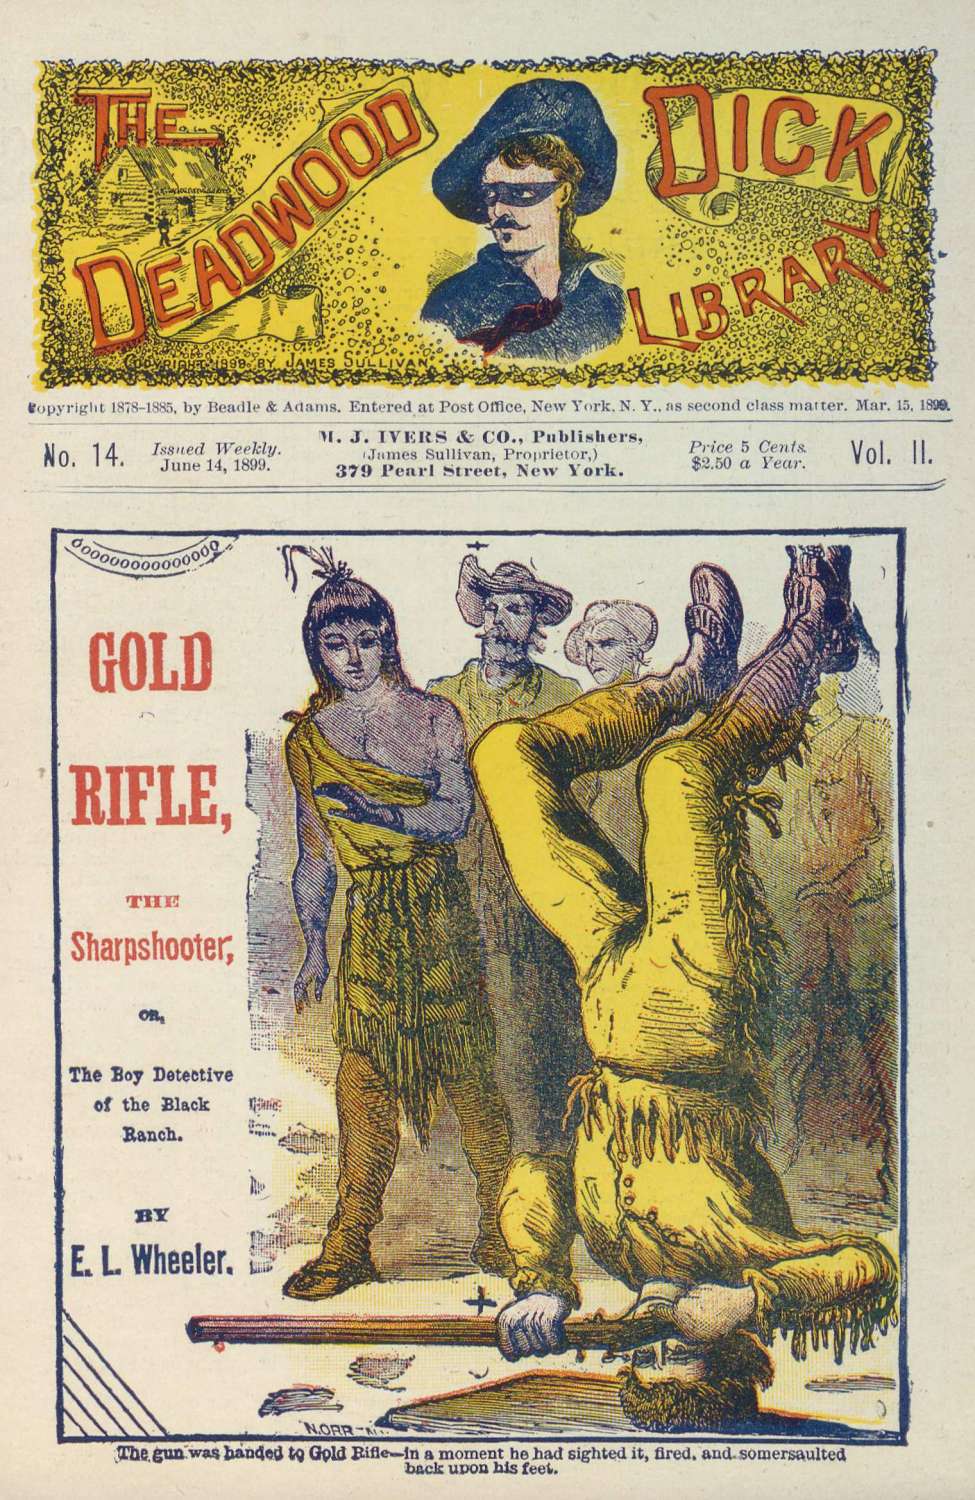 Book Cover For Deadwood Dick Library v2 14 - Gold Rifle, the Sharpshooter